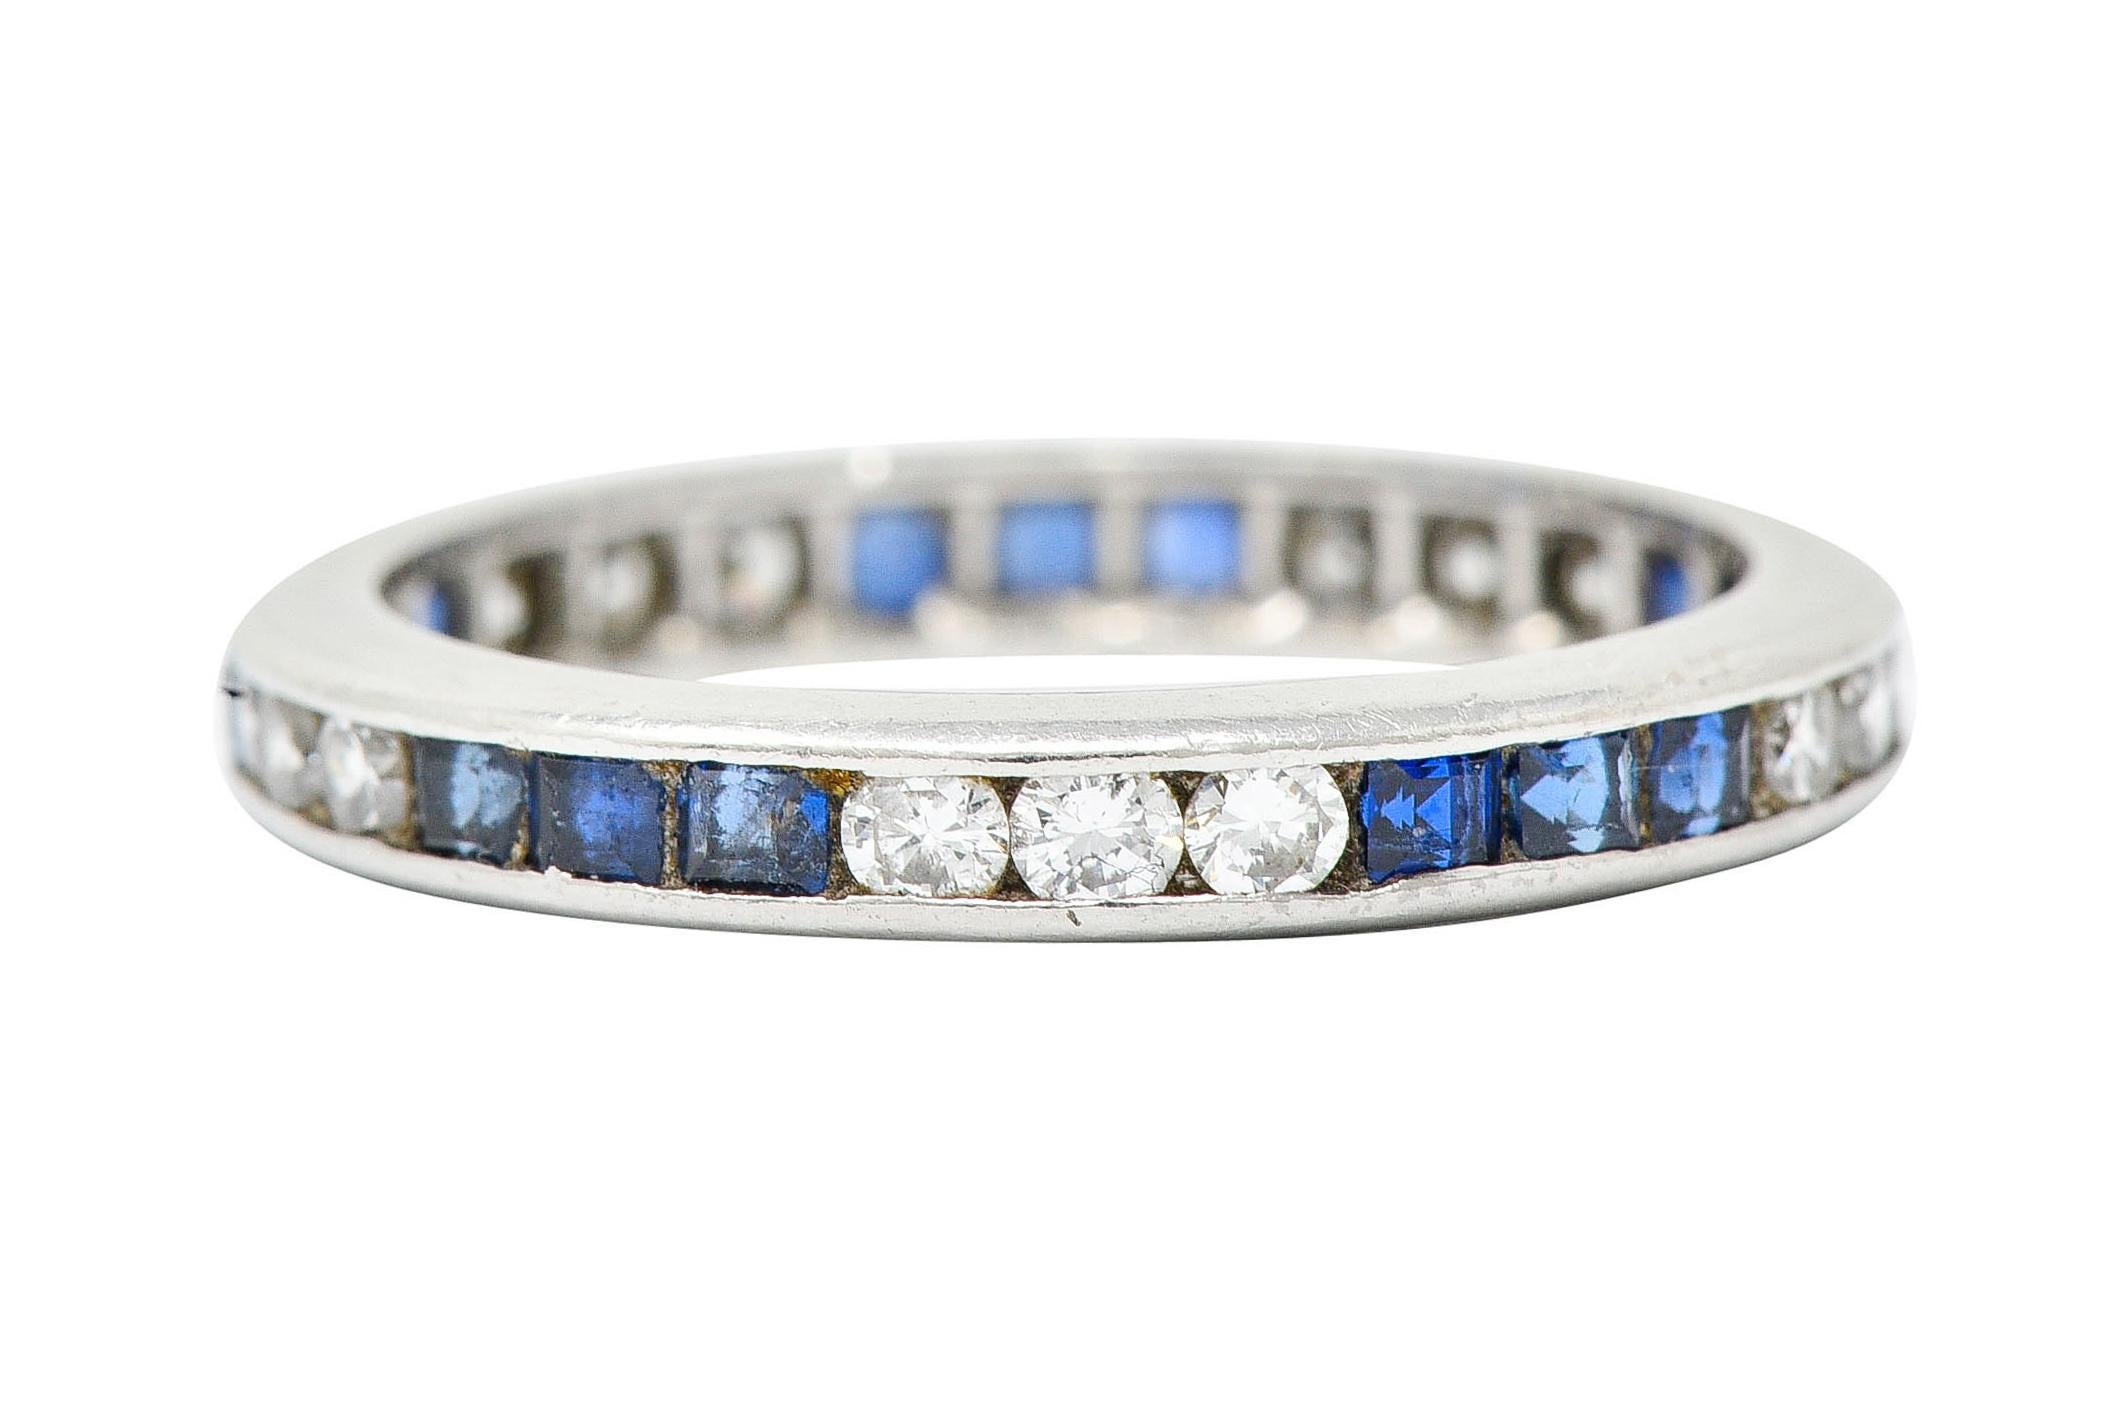 Eternity band ring is channel set fully around by sapphires and diamonds, alternating

Square cut sapphires are a very well matched royal blue and weigh in total approximately 0.50 carat

Round brilliant cut diamonds weigh in total approximately